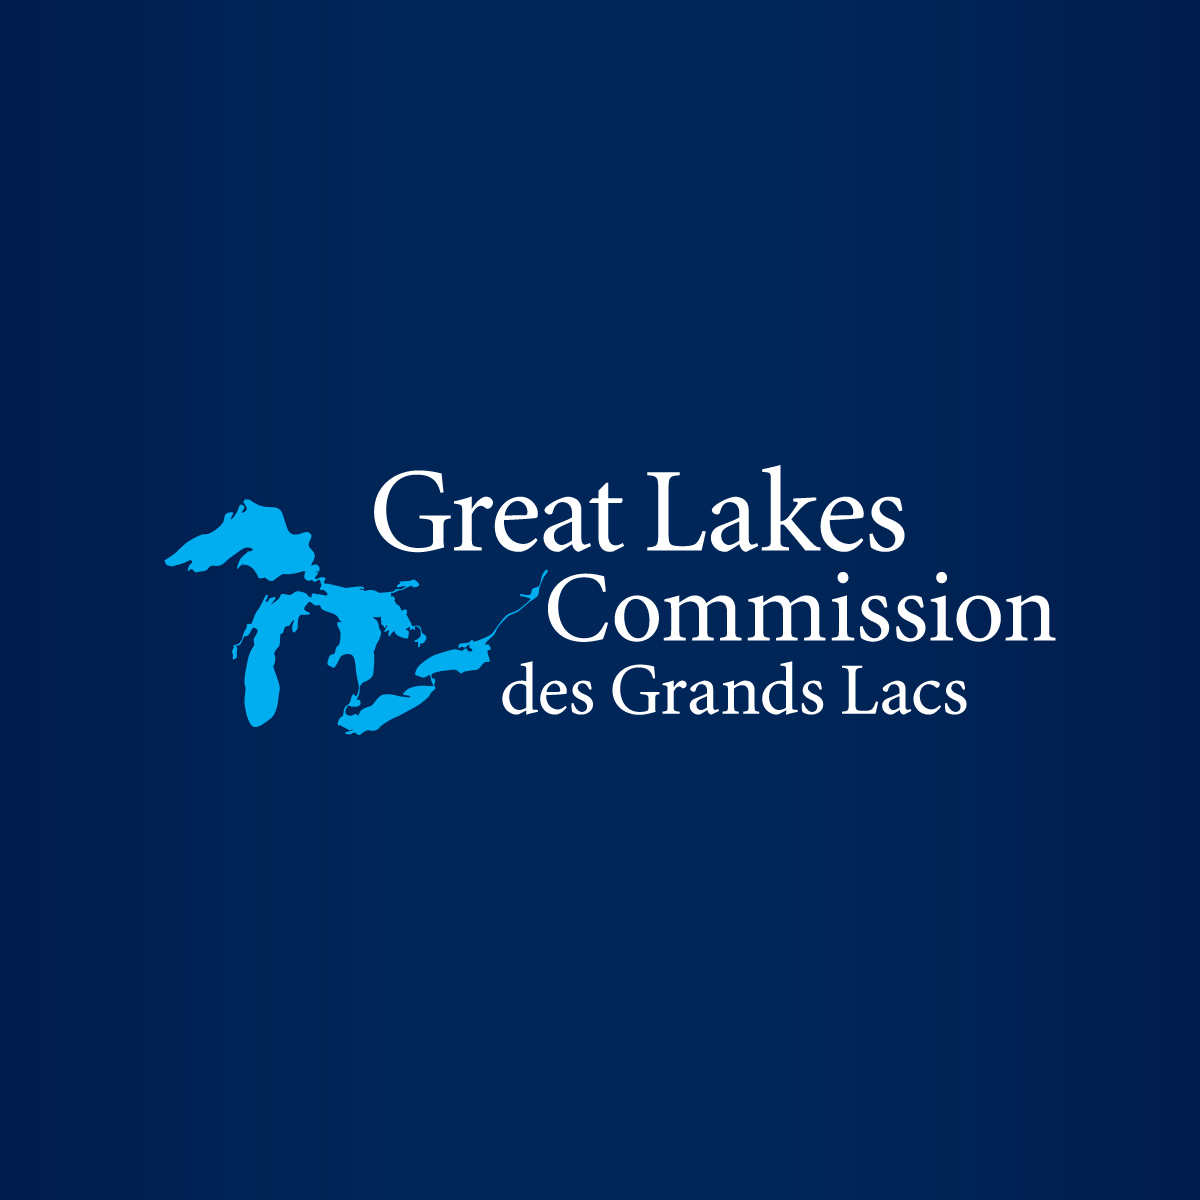 great lakes states and provinces to host fourth annual aquatic invasive species landing blitz